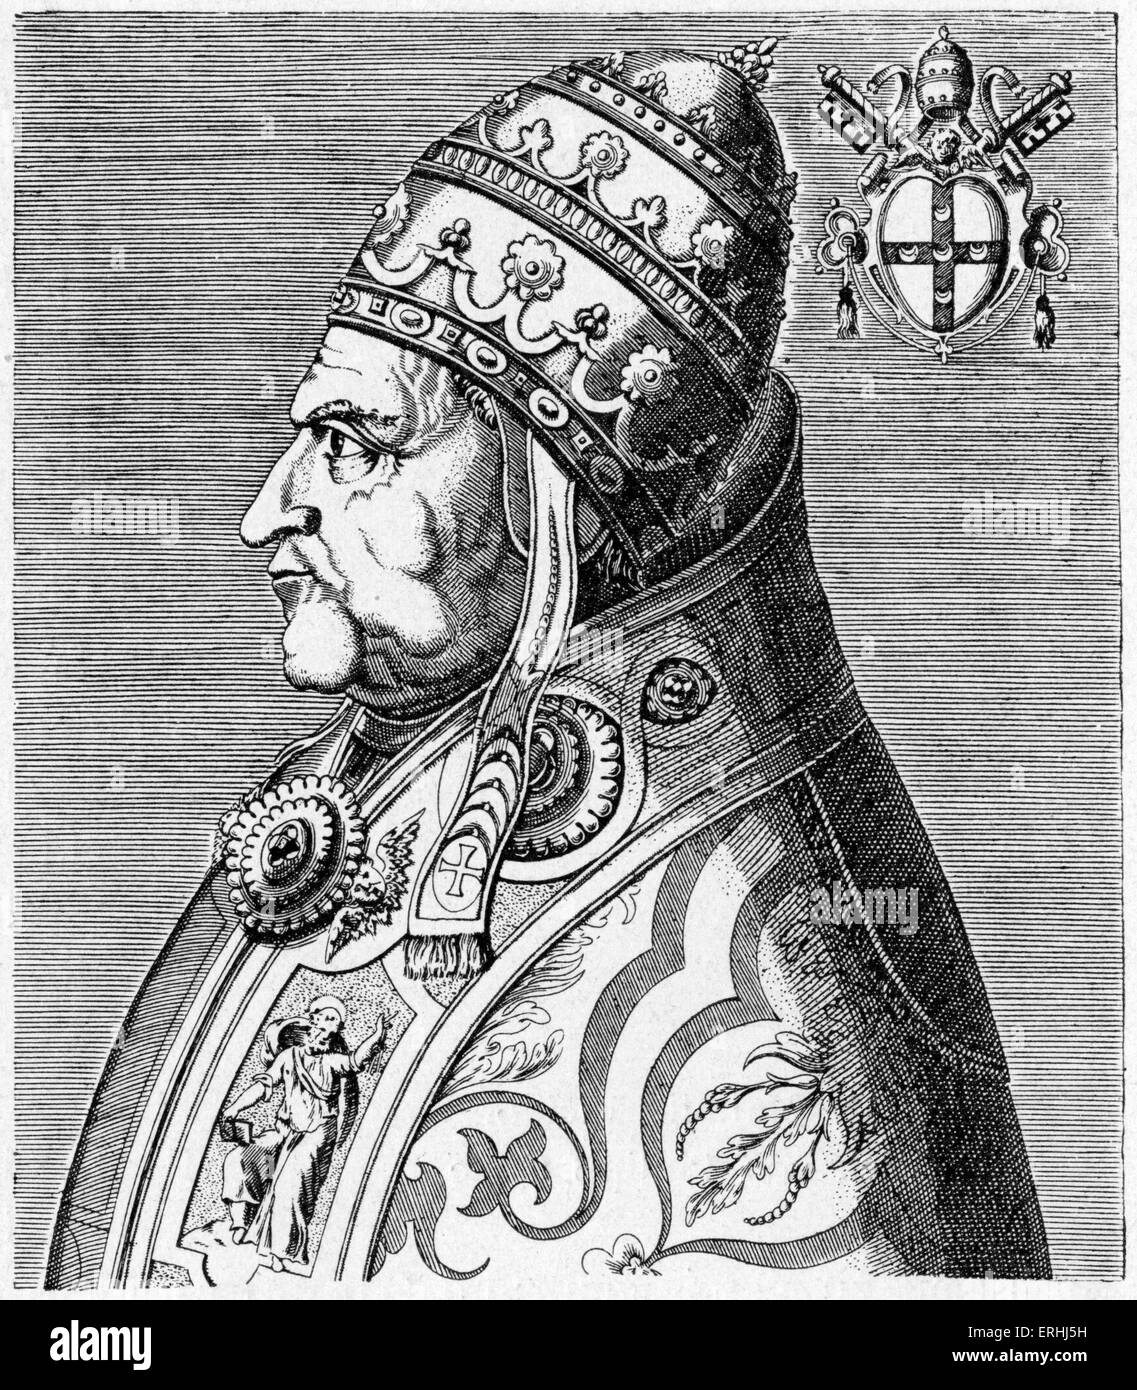 Pope Pius II - portrait, in profile, with coat of arms. Engraving by Philippe Galle, from the work 'Virorum doctorum de Stock Photo